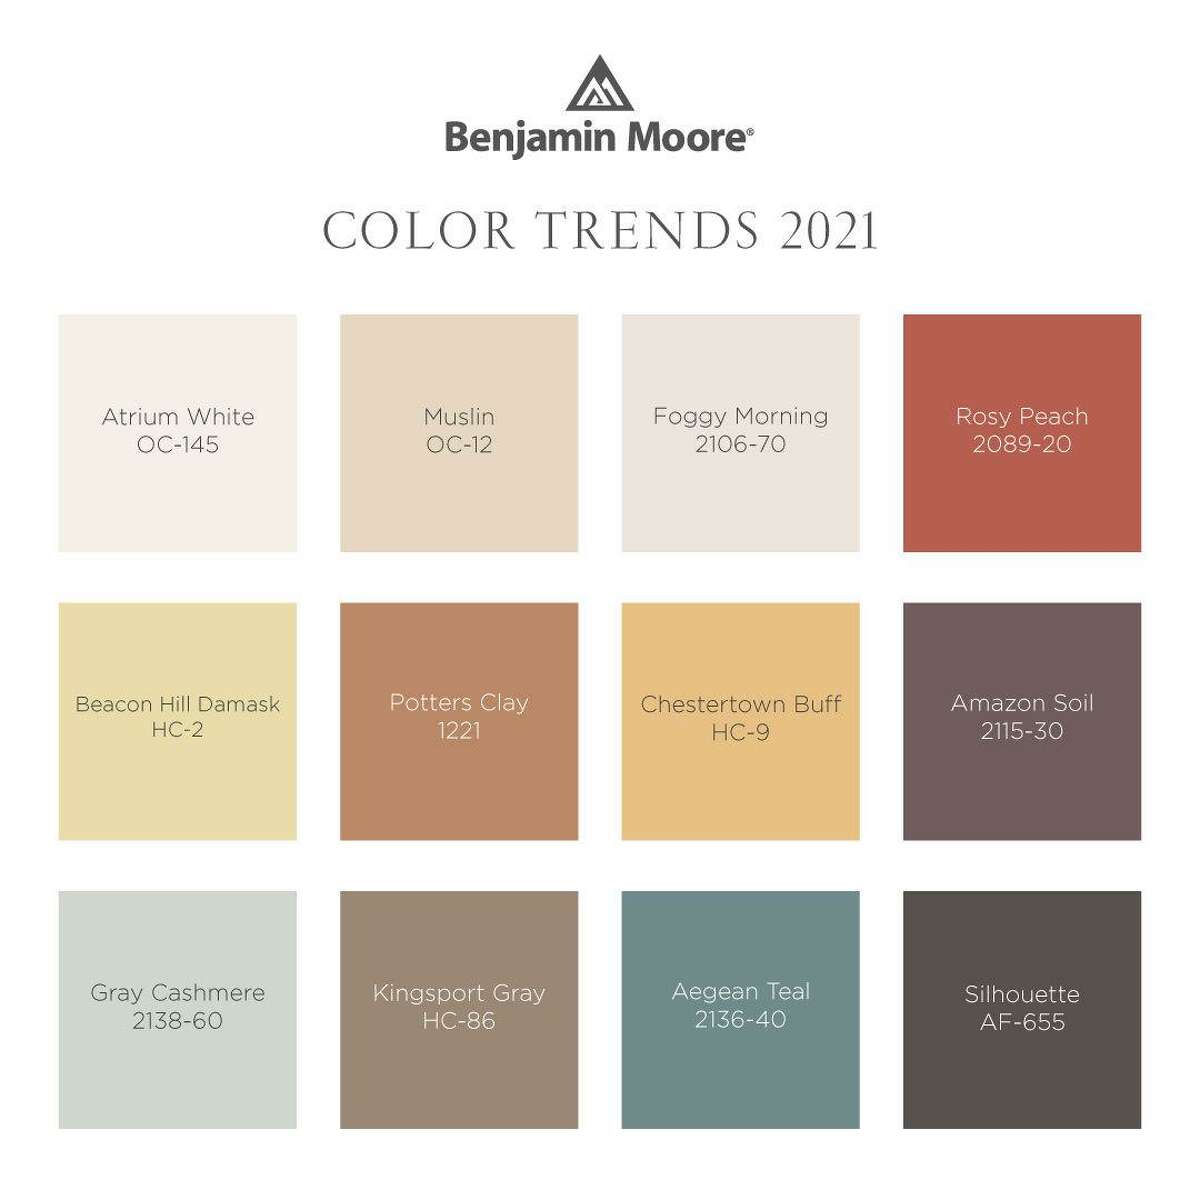 Benjamin Moore’s 2021 Color Trends palette includes 12 colors. “Aegean Teal” is its 2021 Color of the Year.” The full palette isAtrium White, Muslin, Foggy Morning, Rosy Peach, Beacon Hill Damask, Potters Clay, Chestertown Buff, Amazon Soil, Gray Cashmere, Kingsport Gray, Aegean Teal and Silhouette.